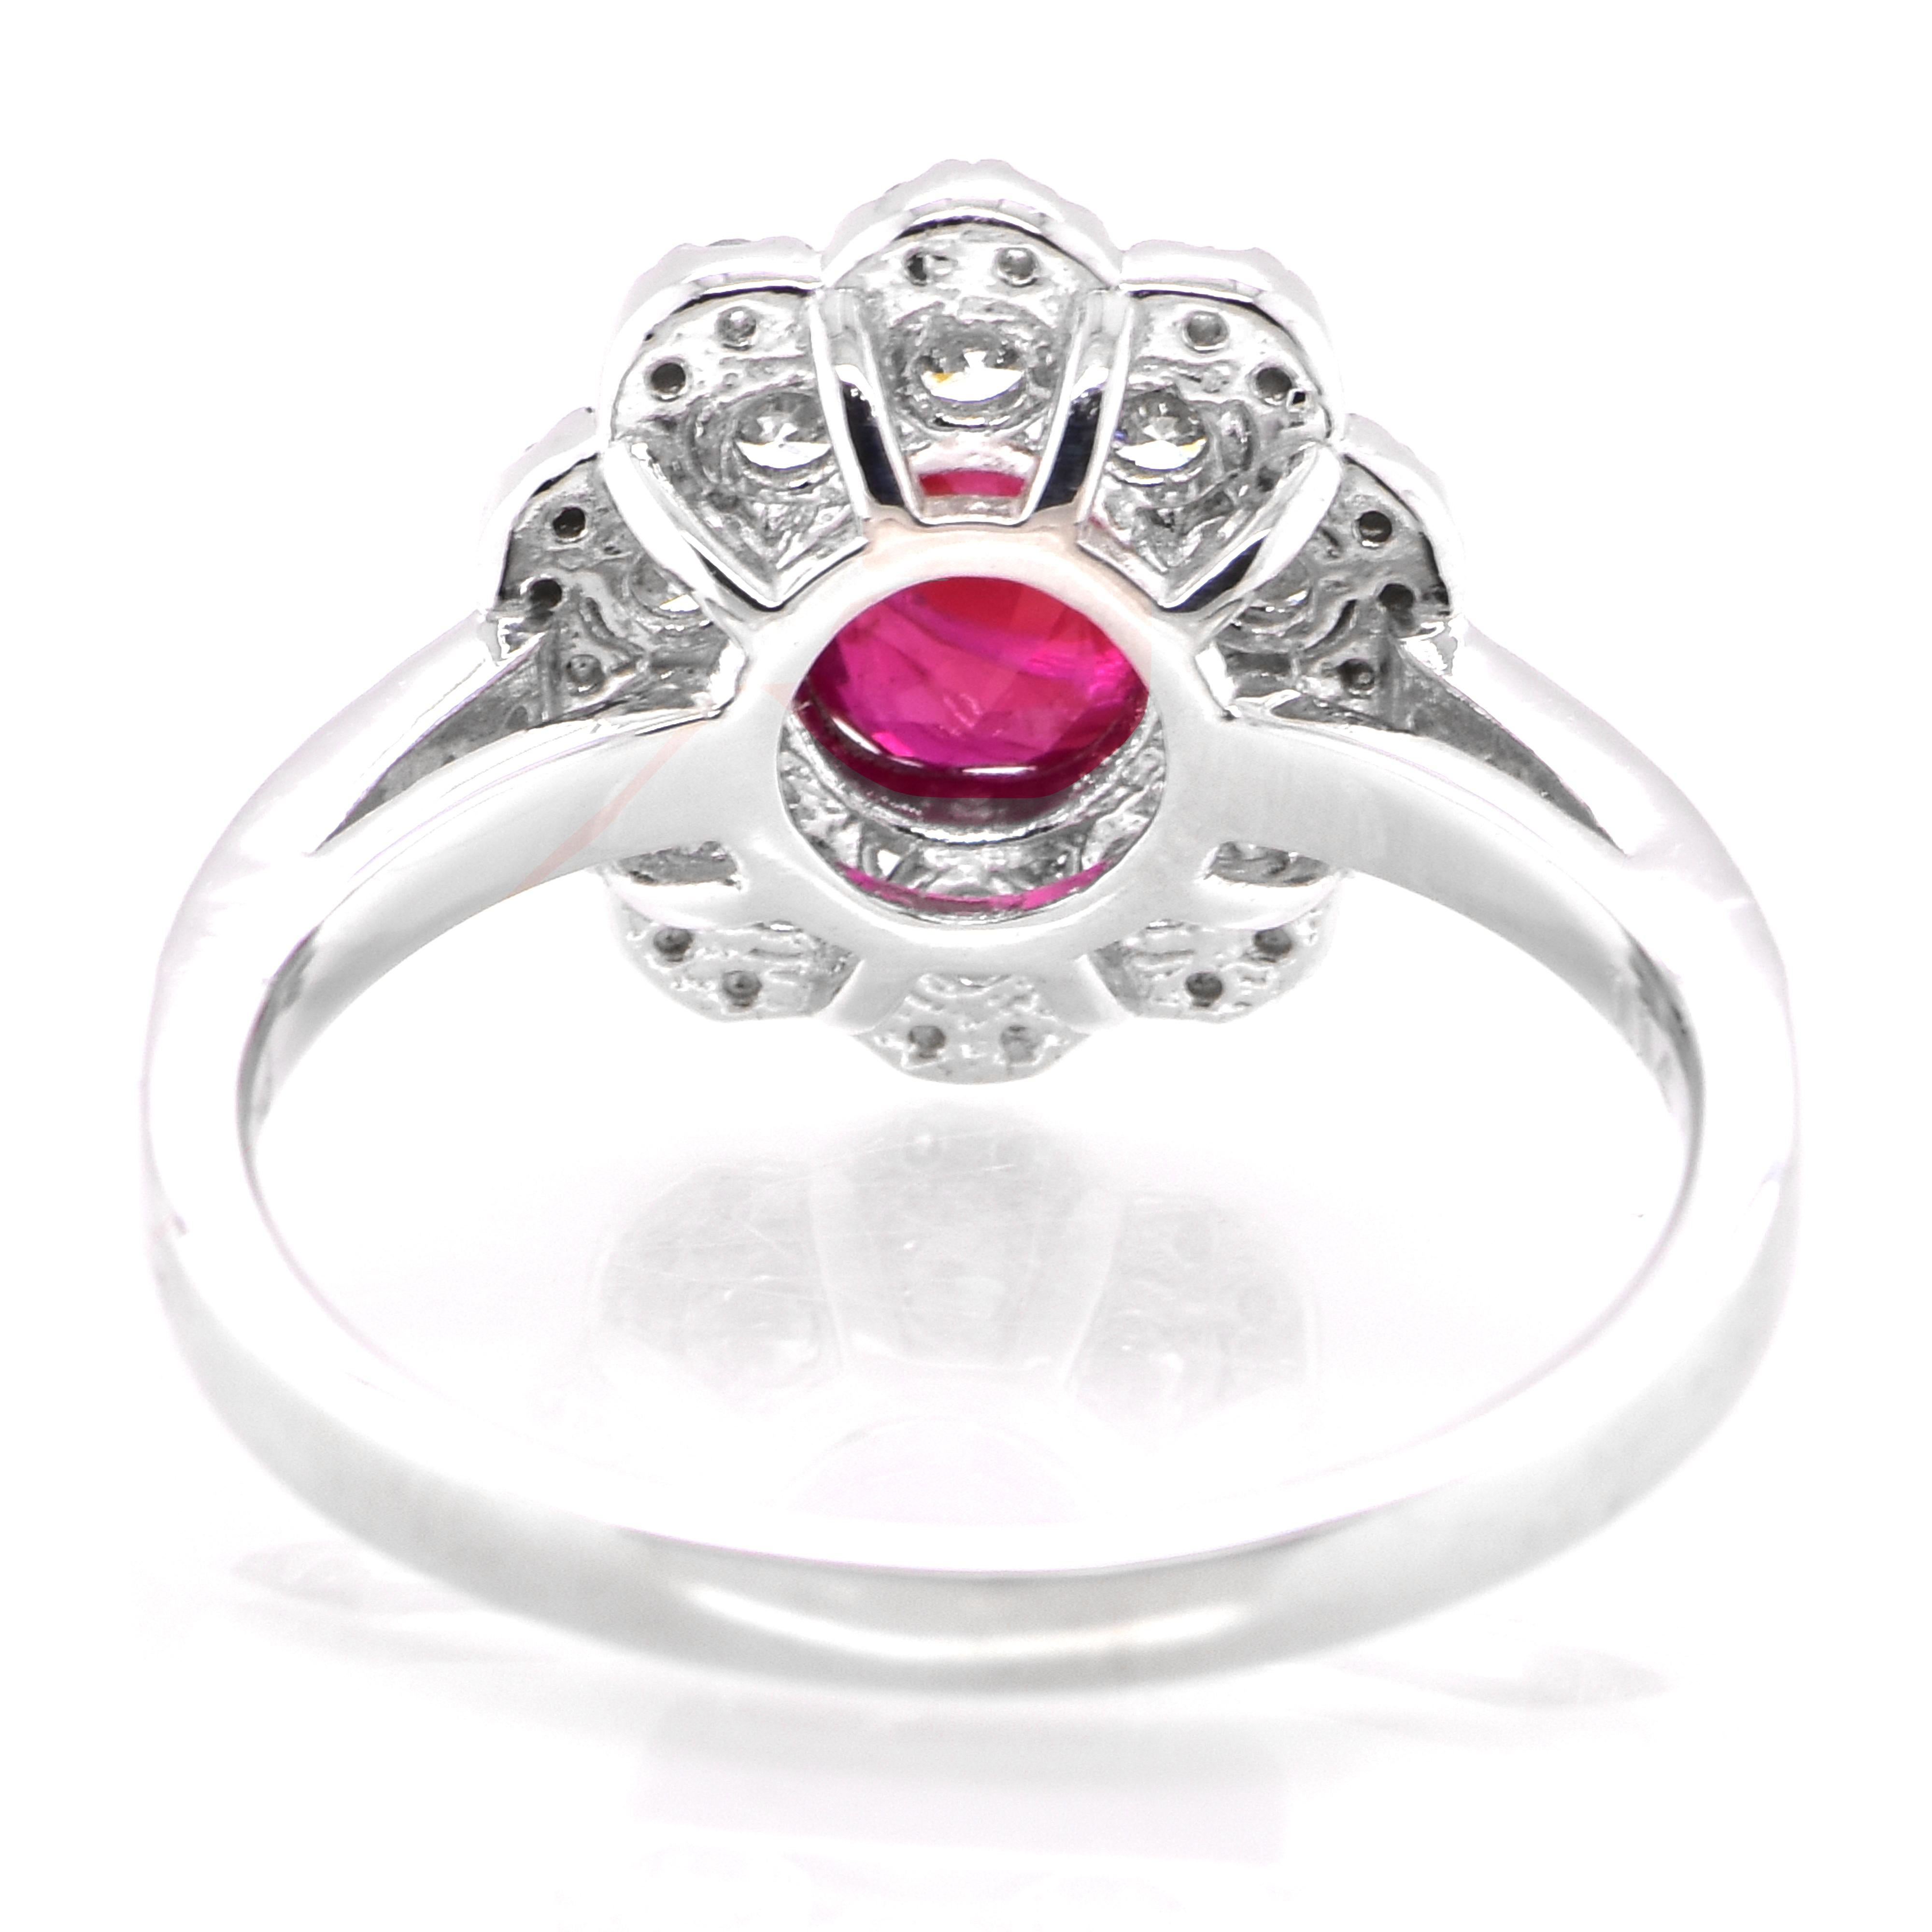 Women's GIA Certified 1.14 Carat Natural, Unheated Ruby and Diamond Ring set in Platinum For Sale